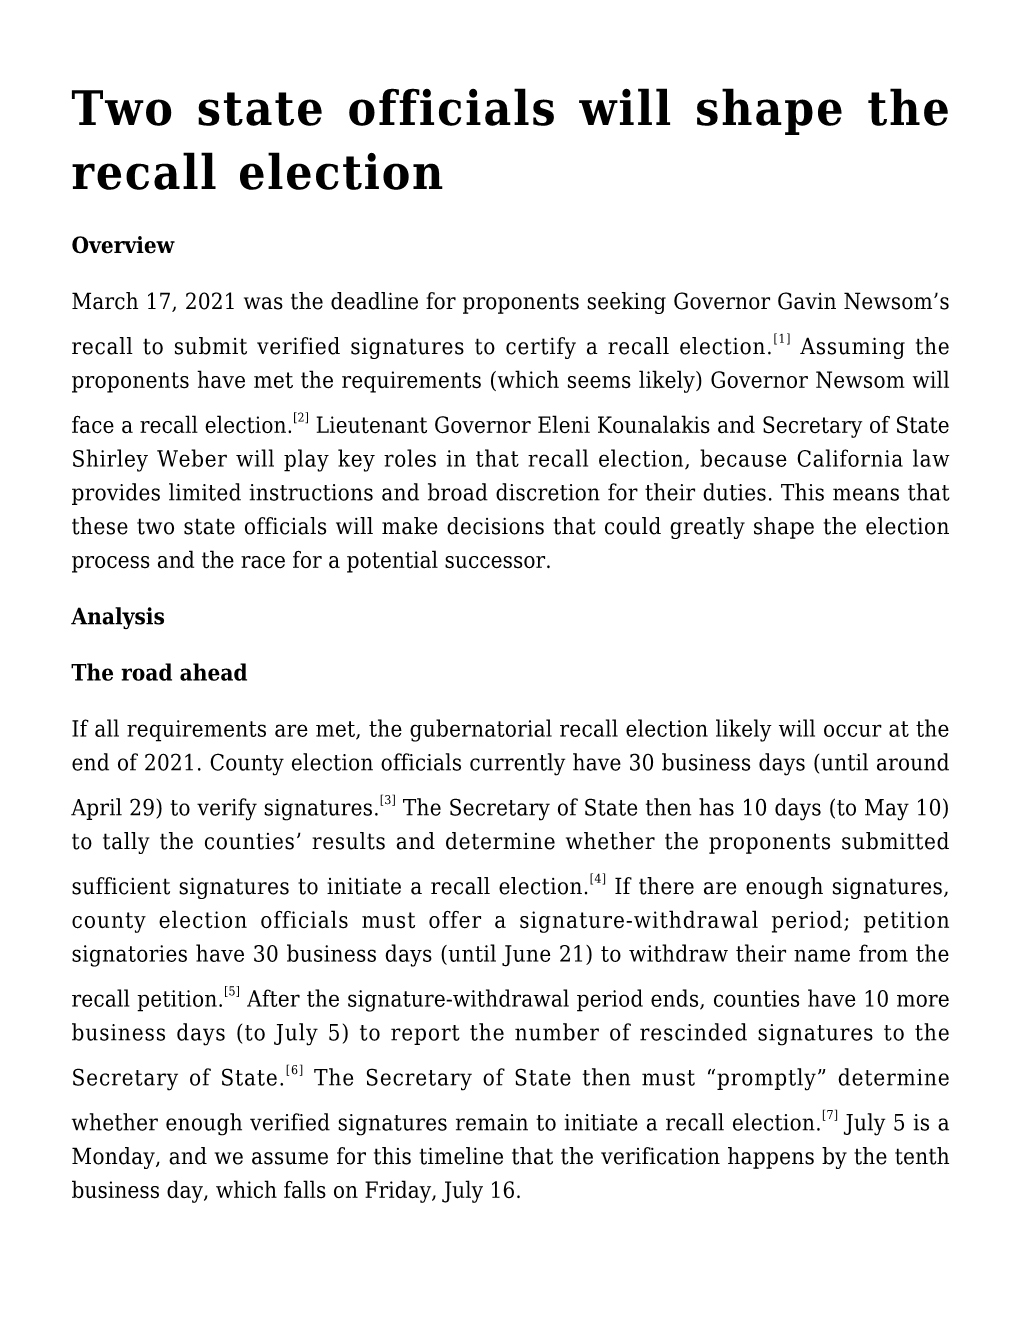 Two State Officials Will Shape the Recall Election